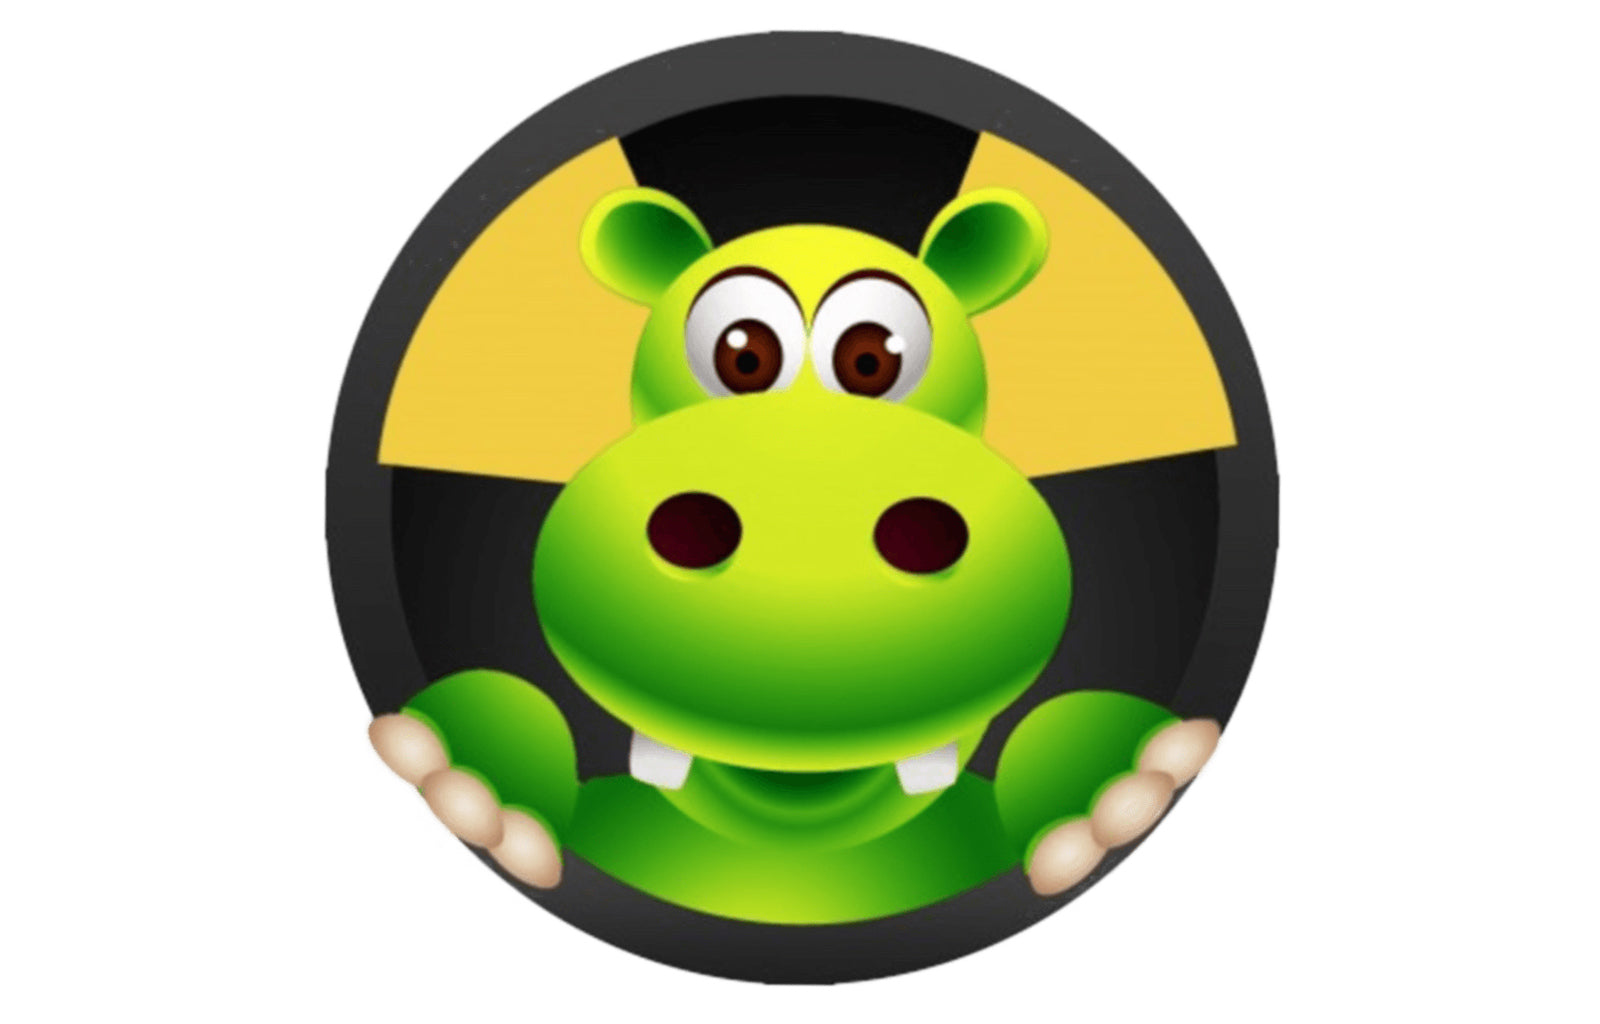 Featured Image of Puddles the Hippo character representing the Happy Hippo Product Green Thai Kratom Powder (Atomic Hippo)